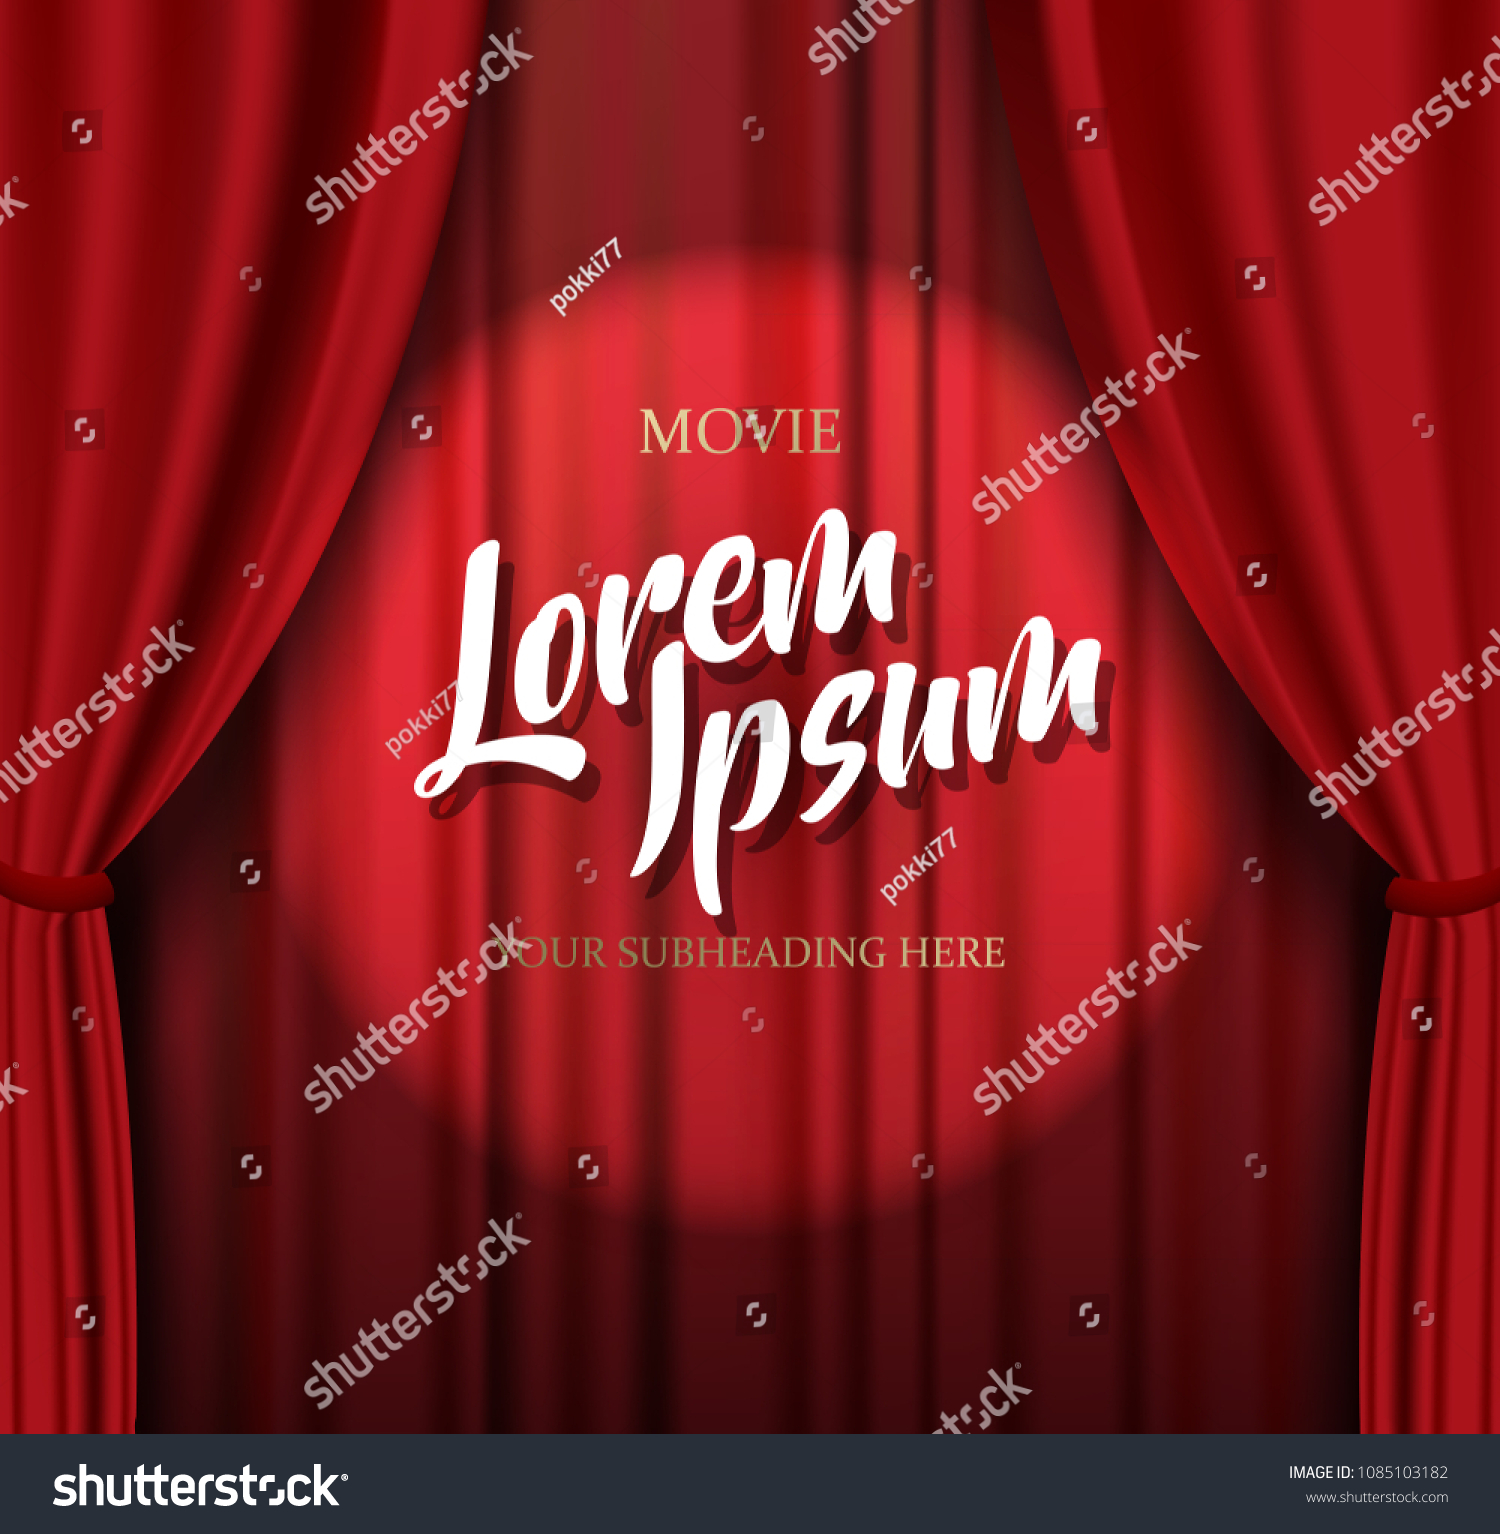 Teathre Stage Template Red Heavy Curtain Stock Vector (Royalty Free ...